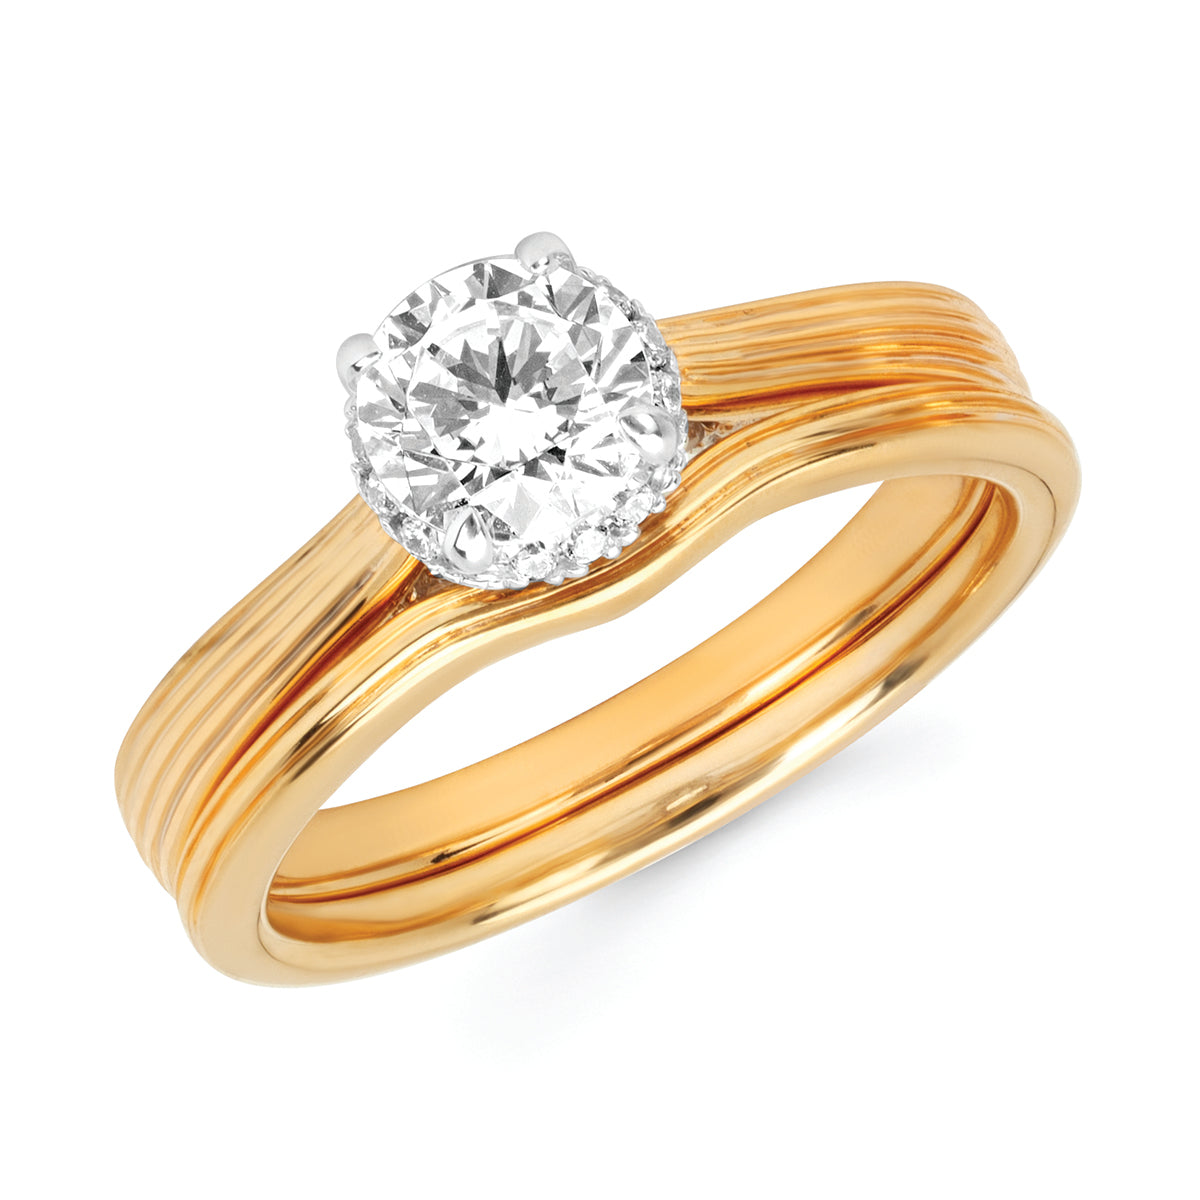 Diamond Semi Mount shown with .75 Ct. Round Center in 14K Gold